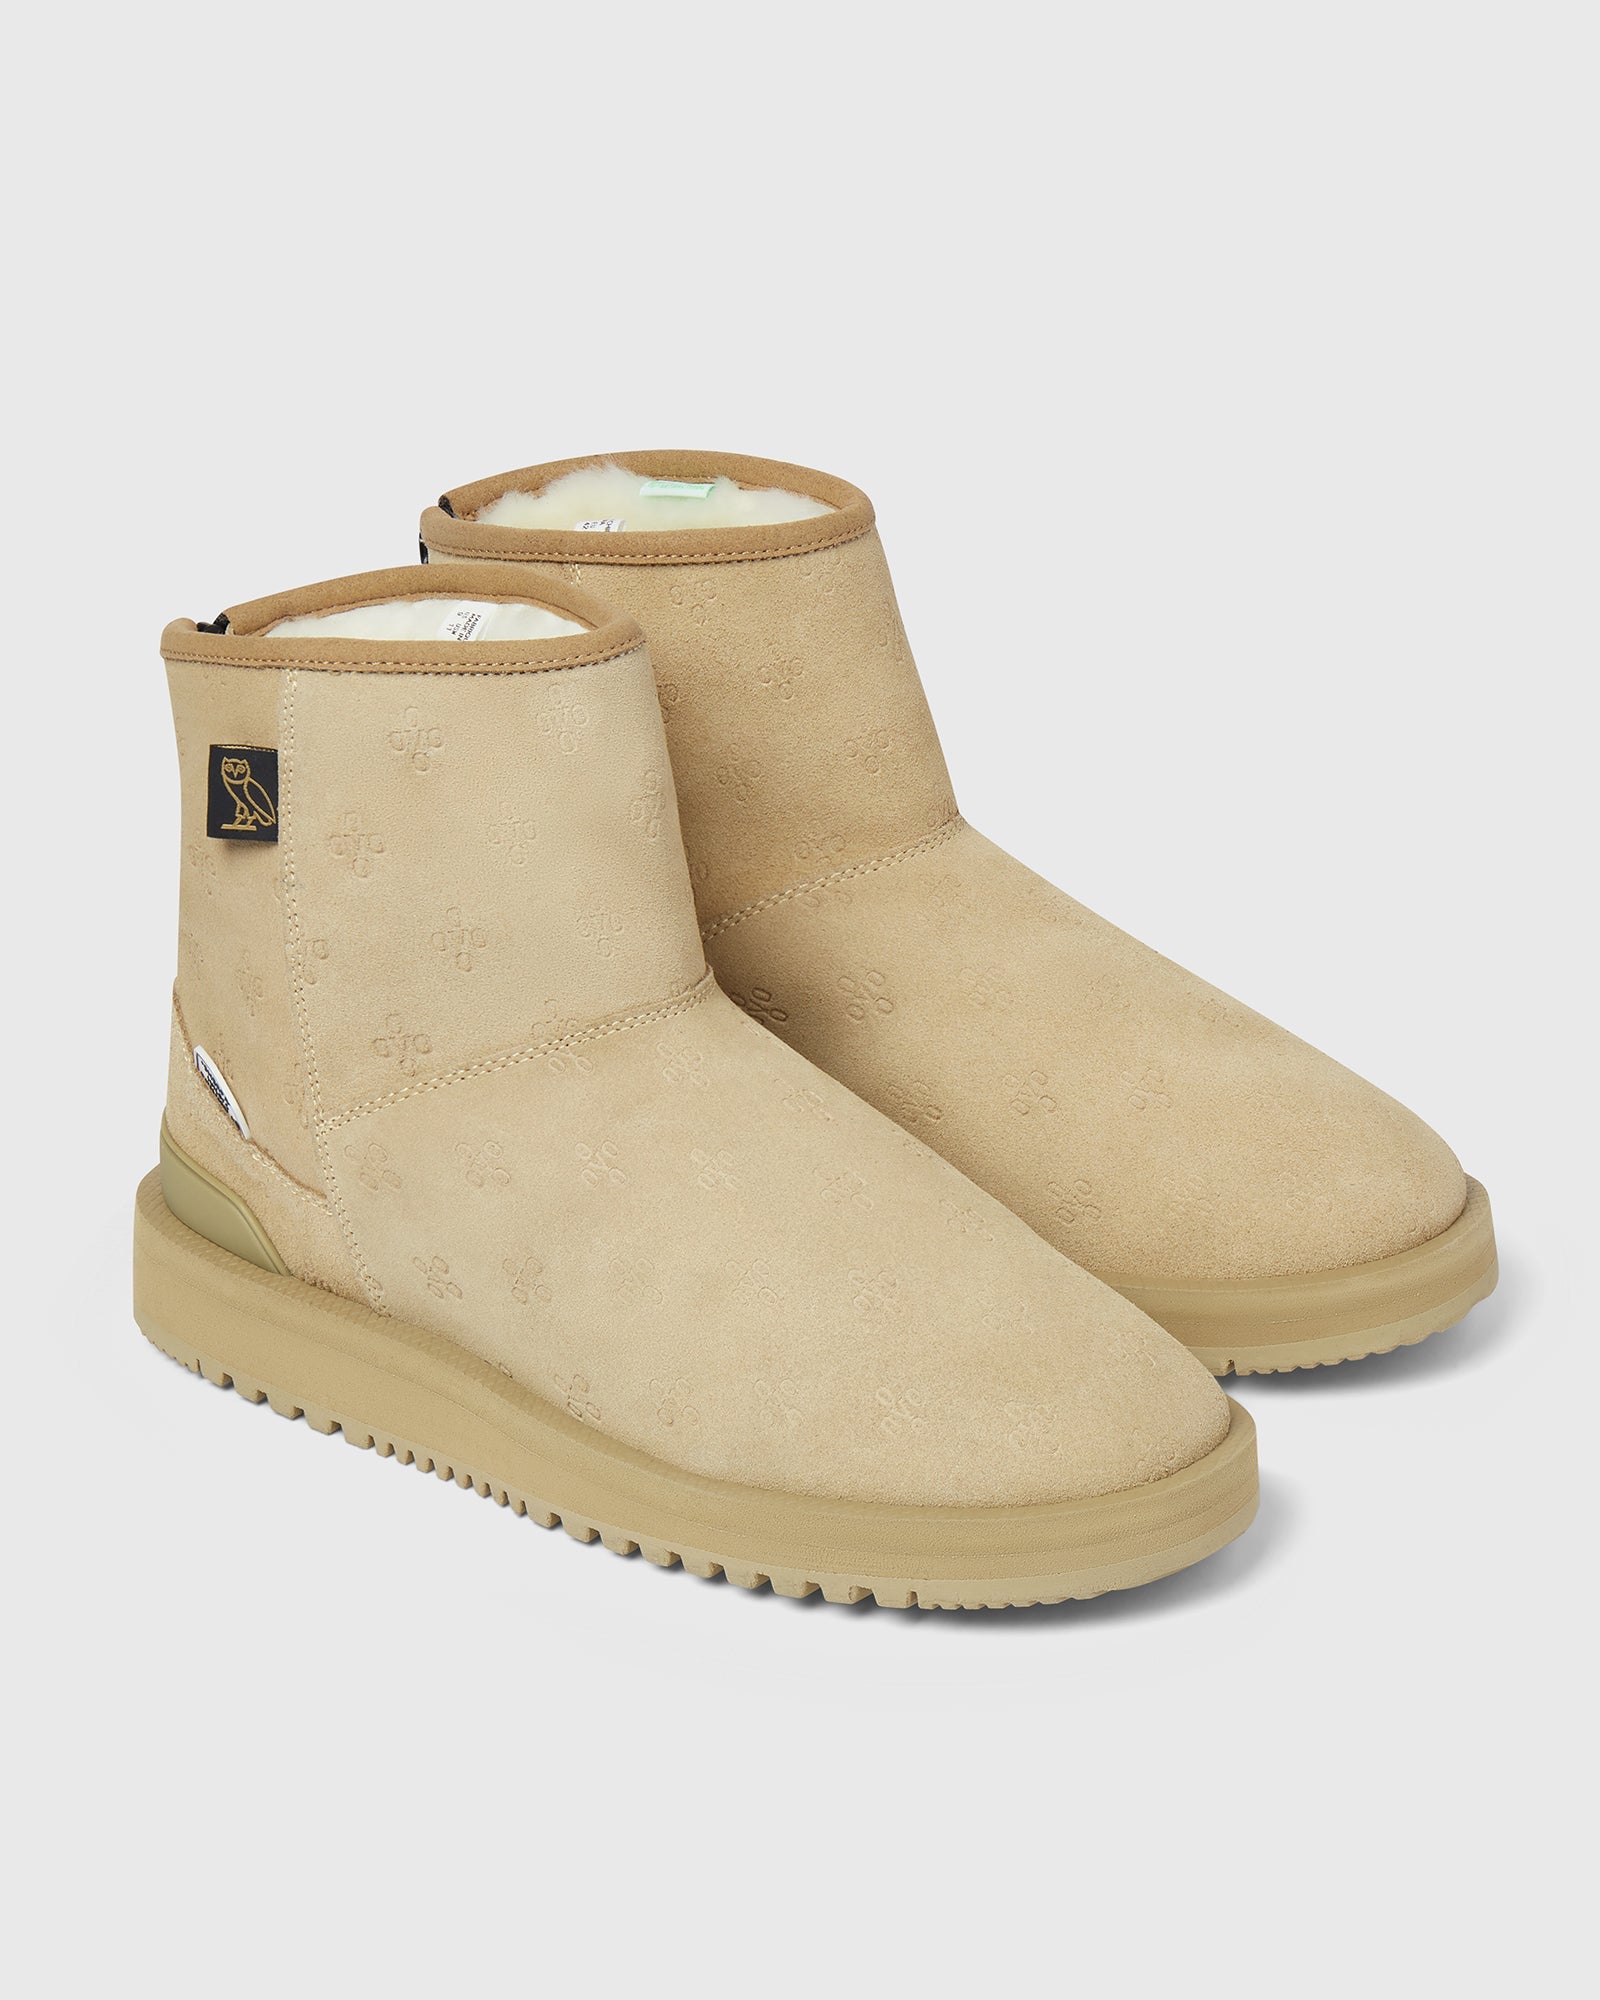 SUICOKE OVO Edition ELS-Mwpab-MID in Beige OG-080MWPAB-OVO | Shop from eightywingold an official brand partner for SUICOKE Canada and US.